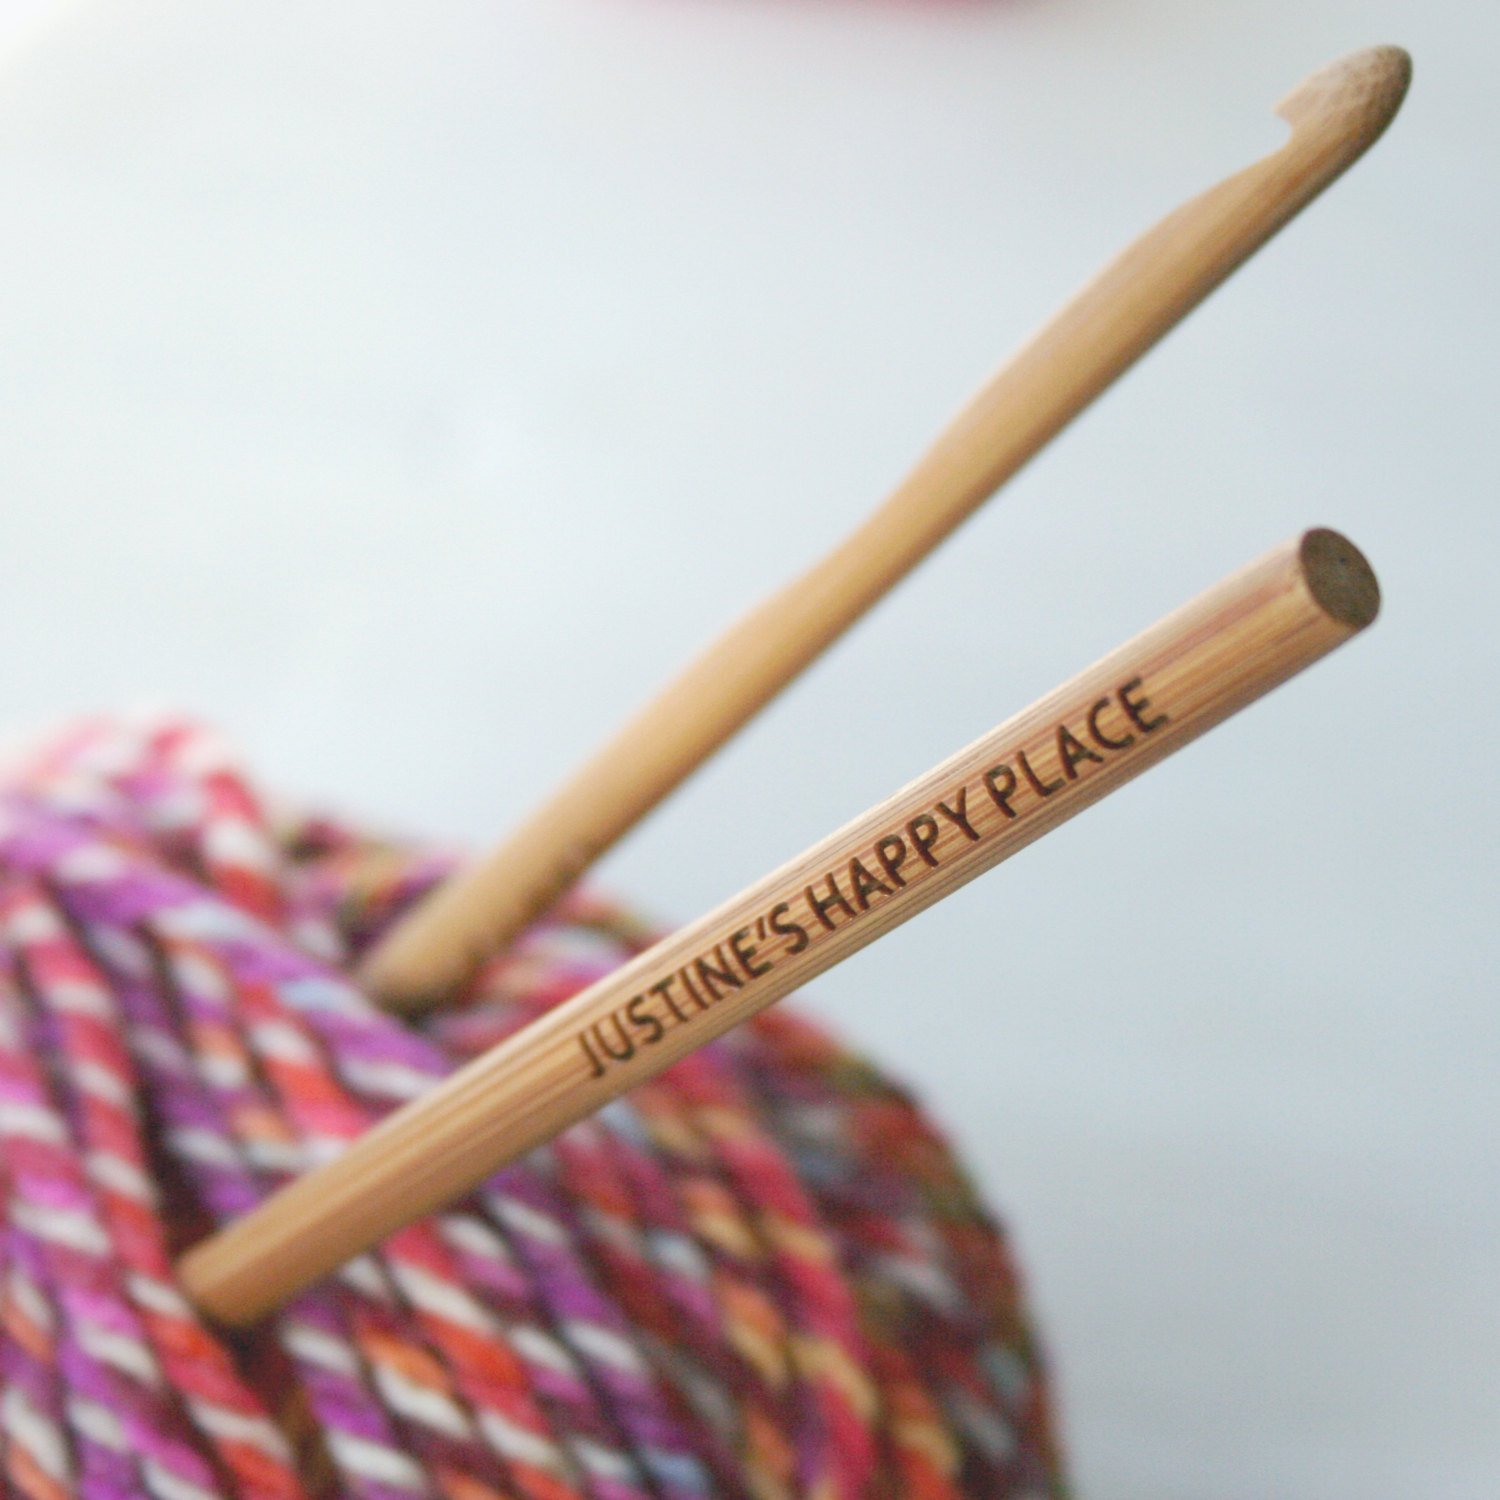 Mother's Day personalized gifts for grandmothers: Personalized crochet hooks at Wood Paper Scissors